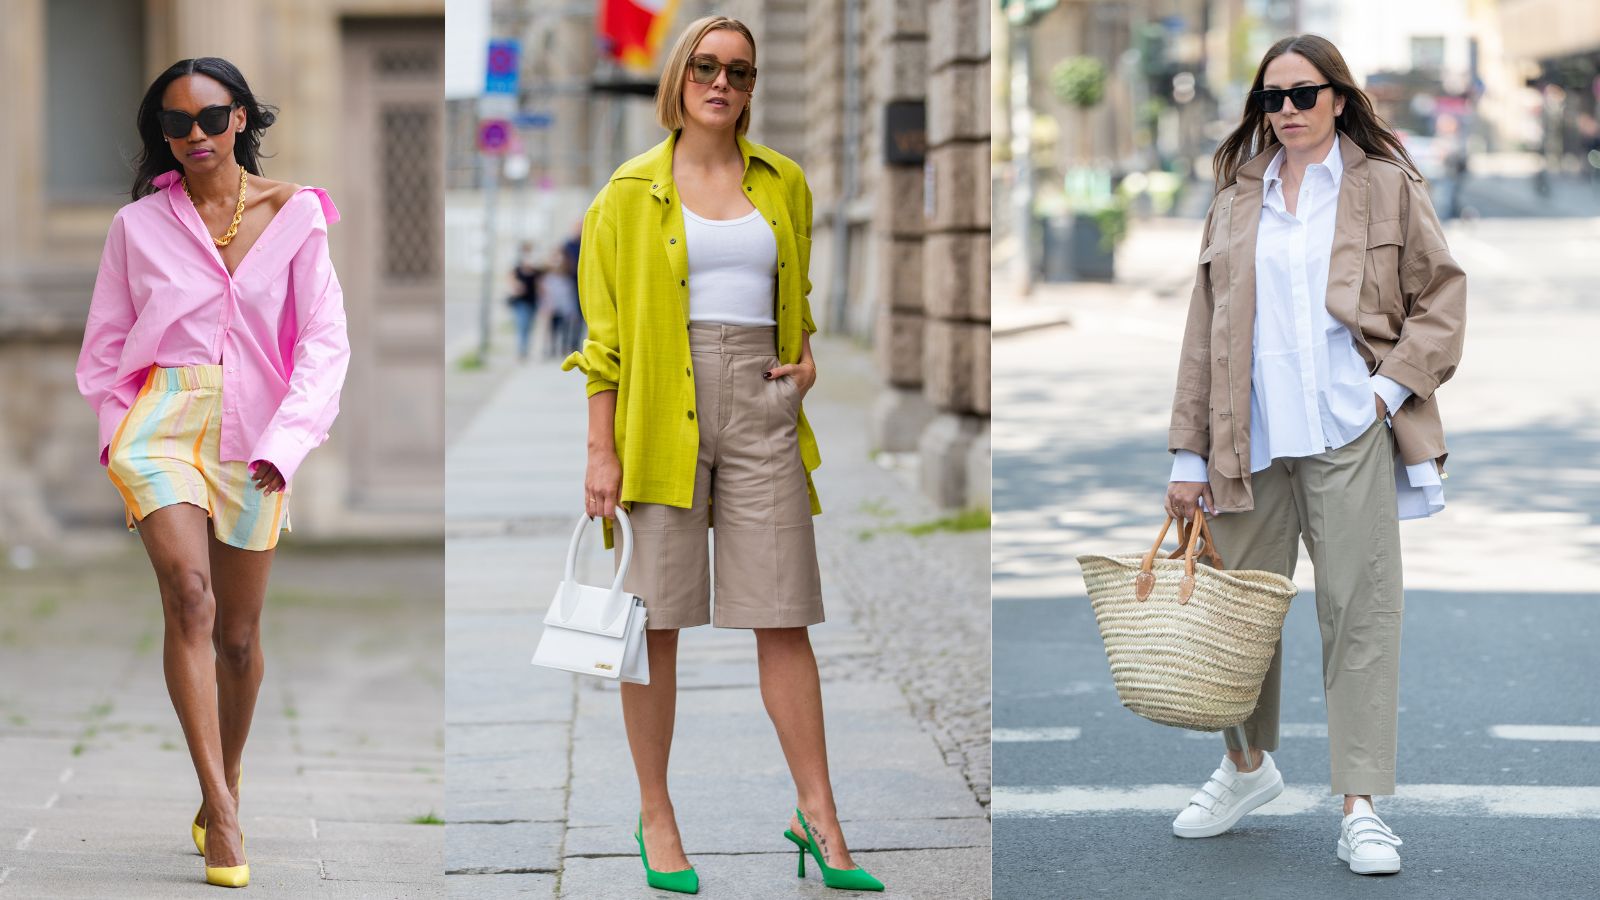 How to style oversized shirts: Fashion tips from experts